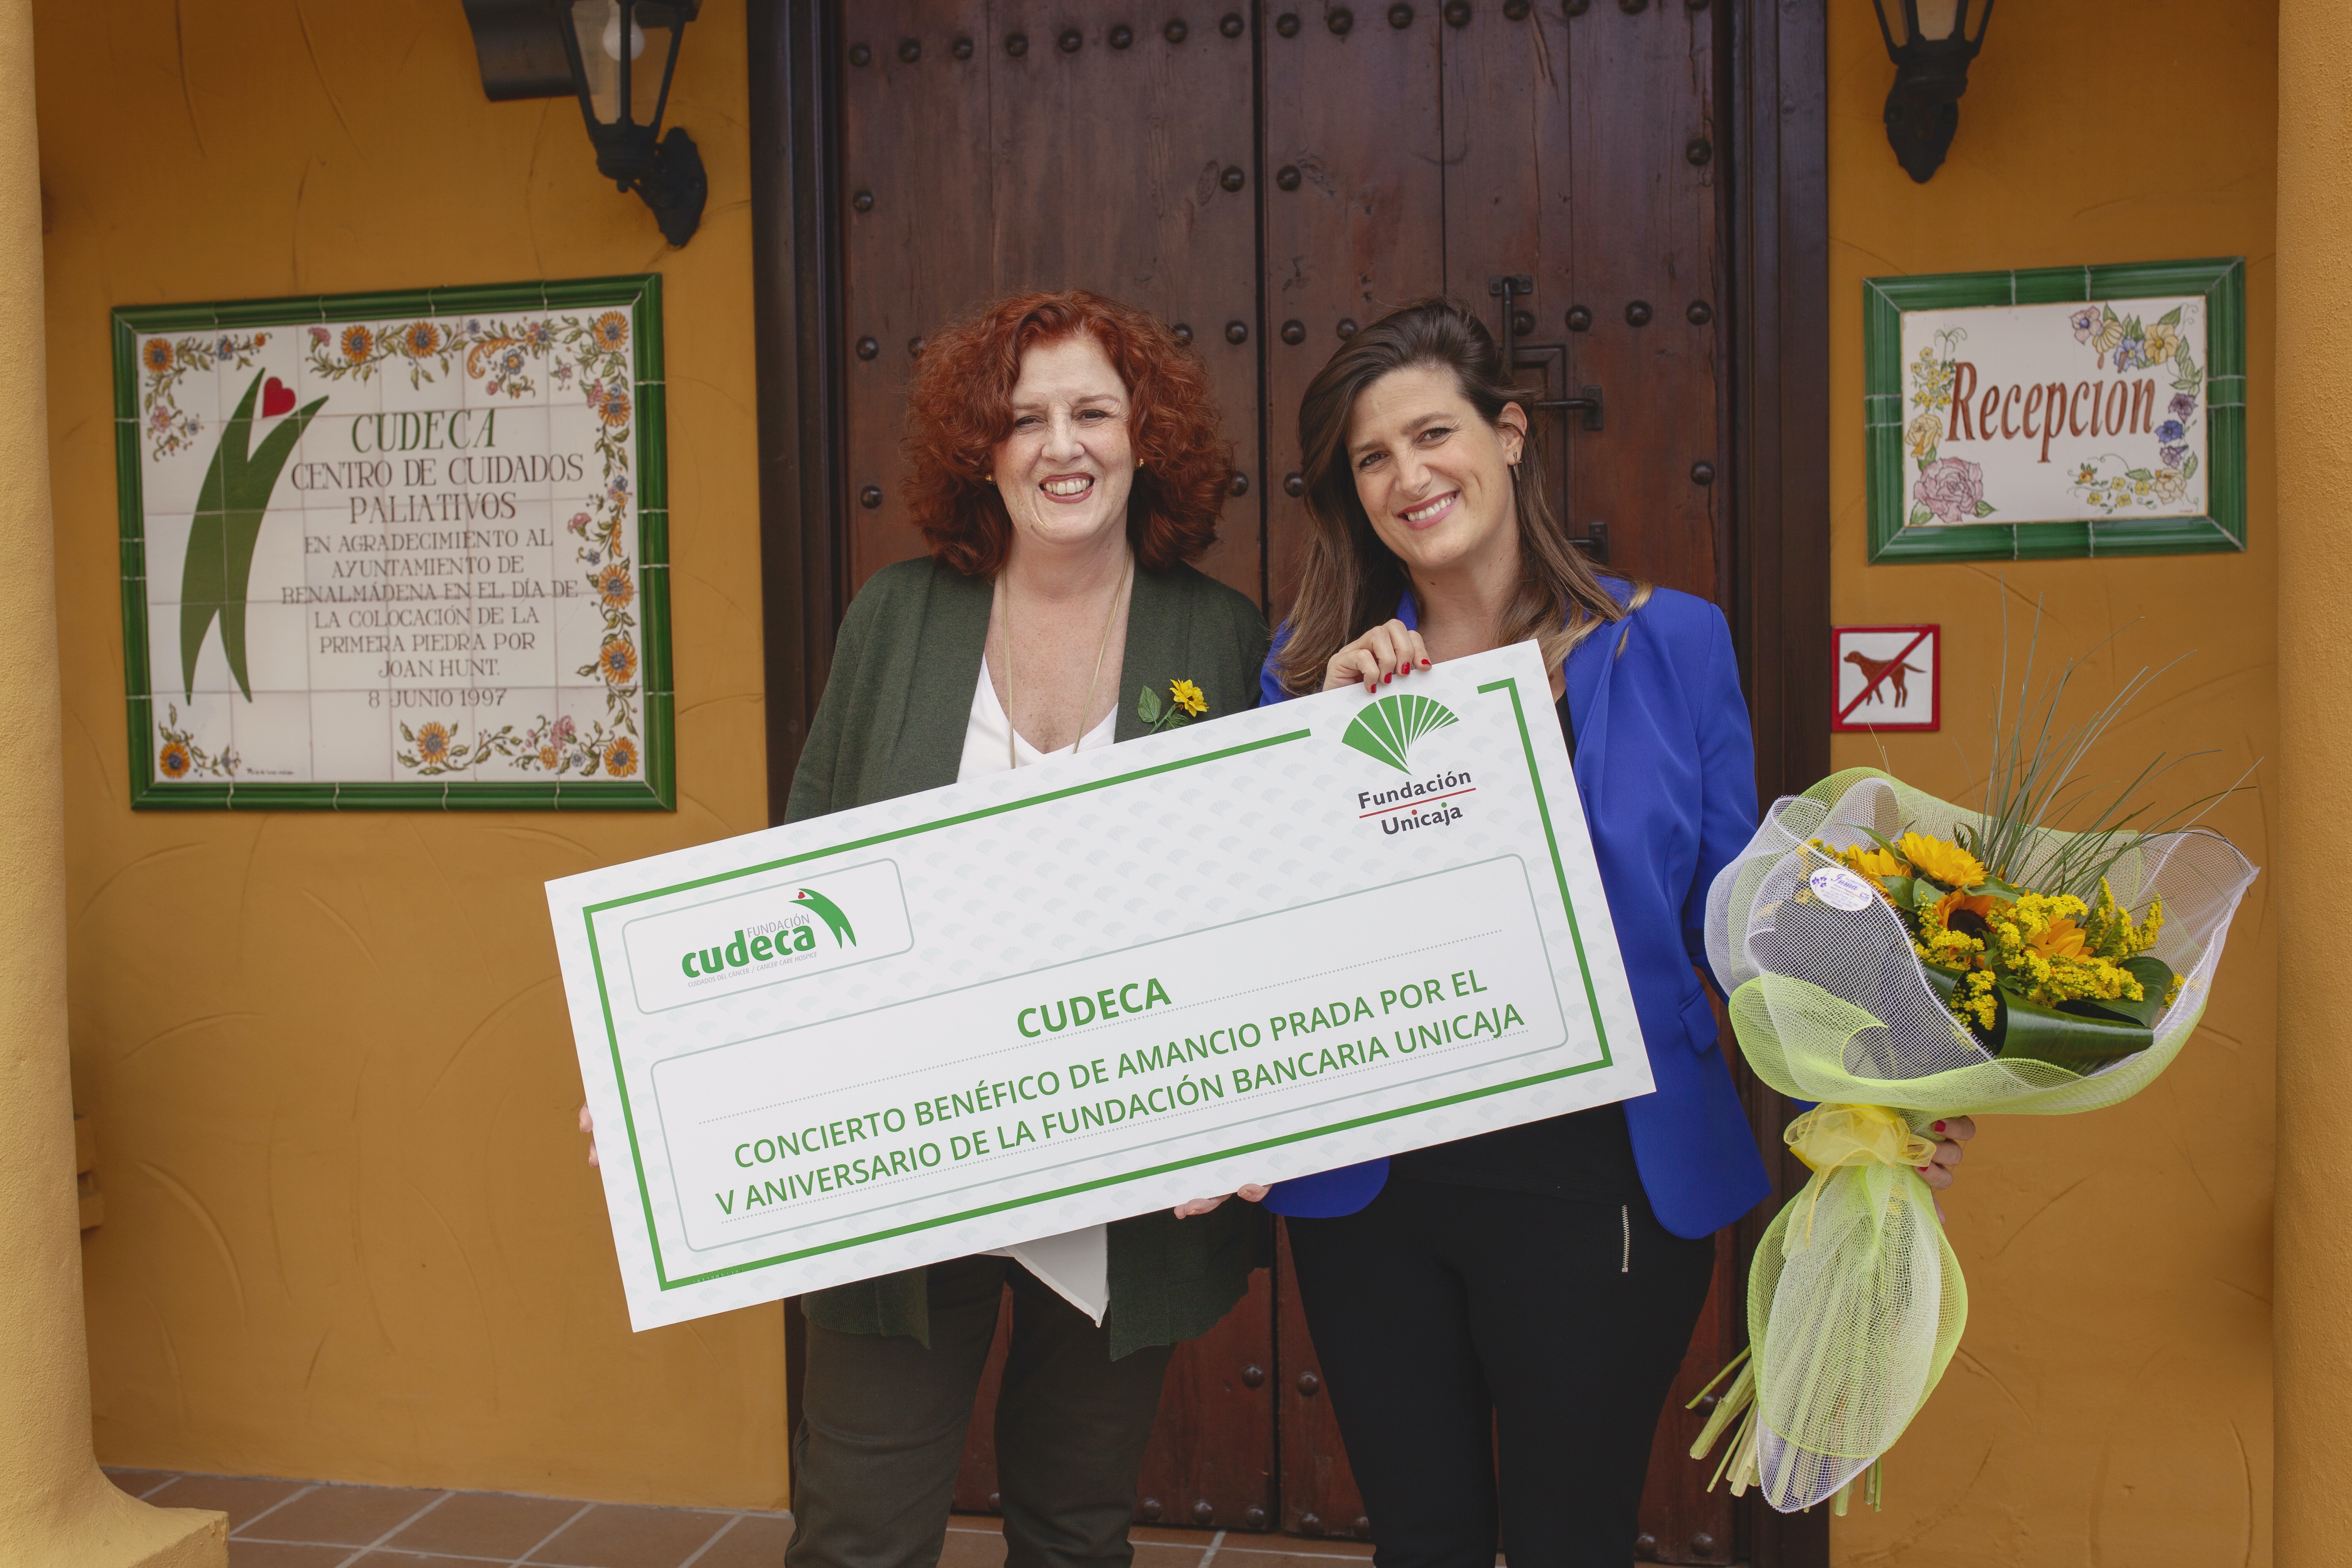 Charity cheque from Unicaja Foundation